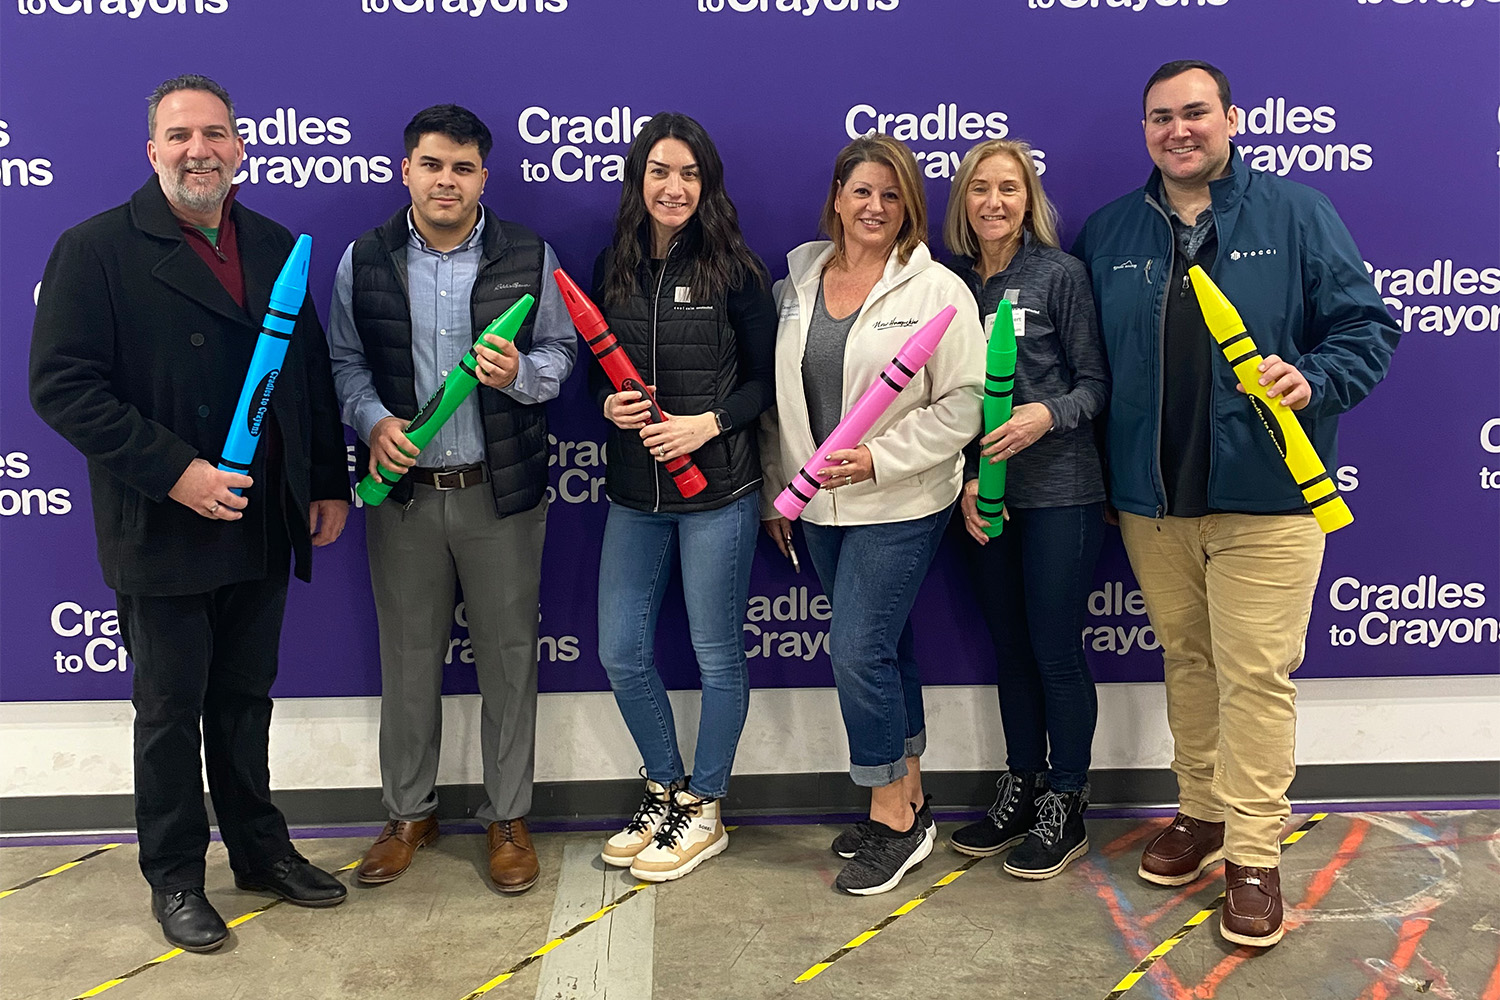 Tocci employees posing for group photo while holding big fake crayons 